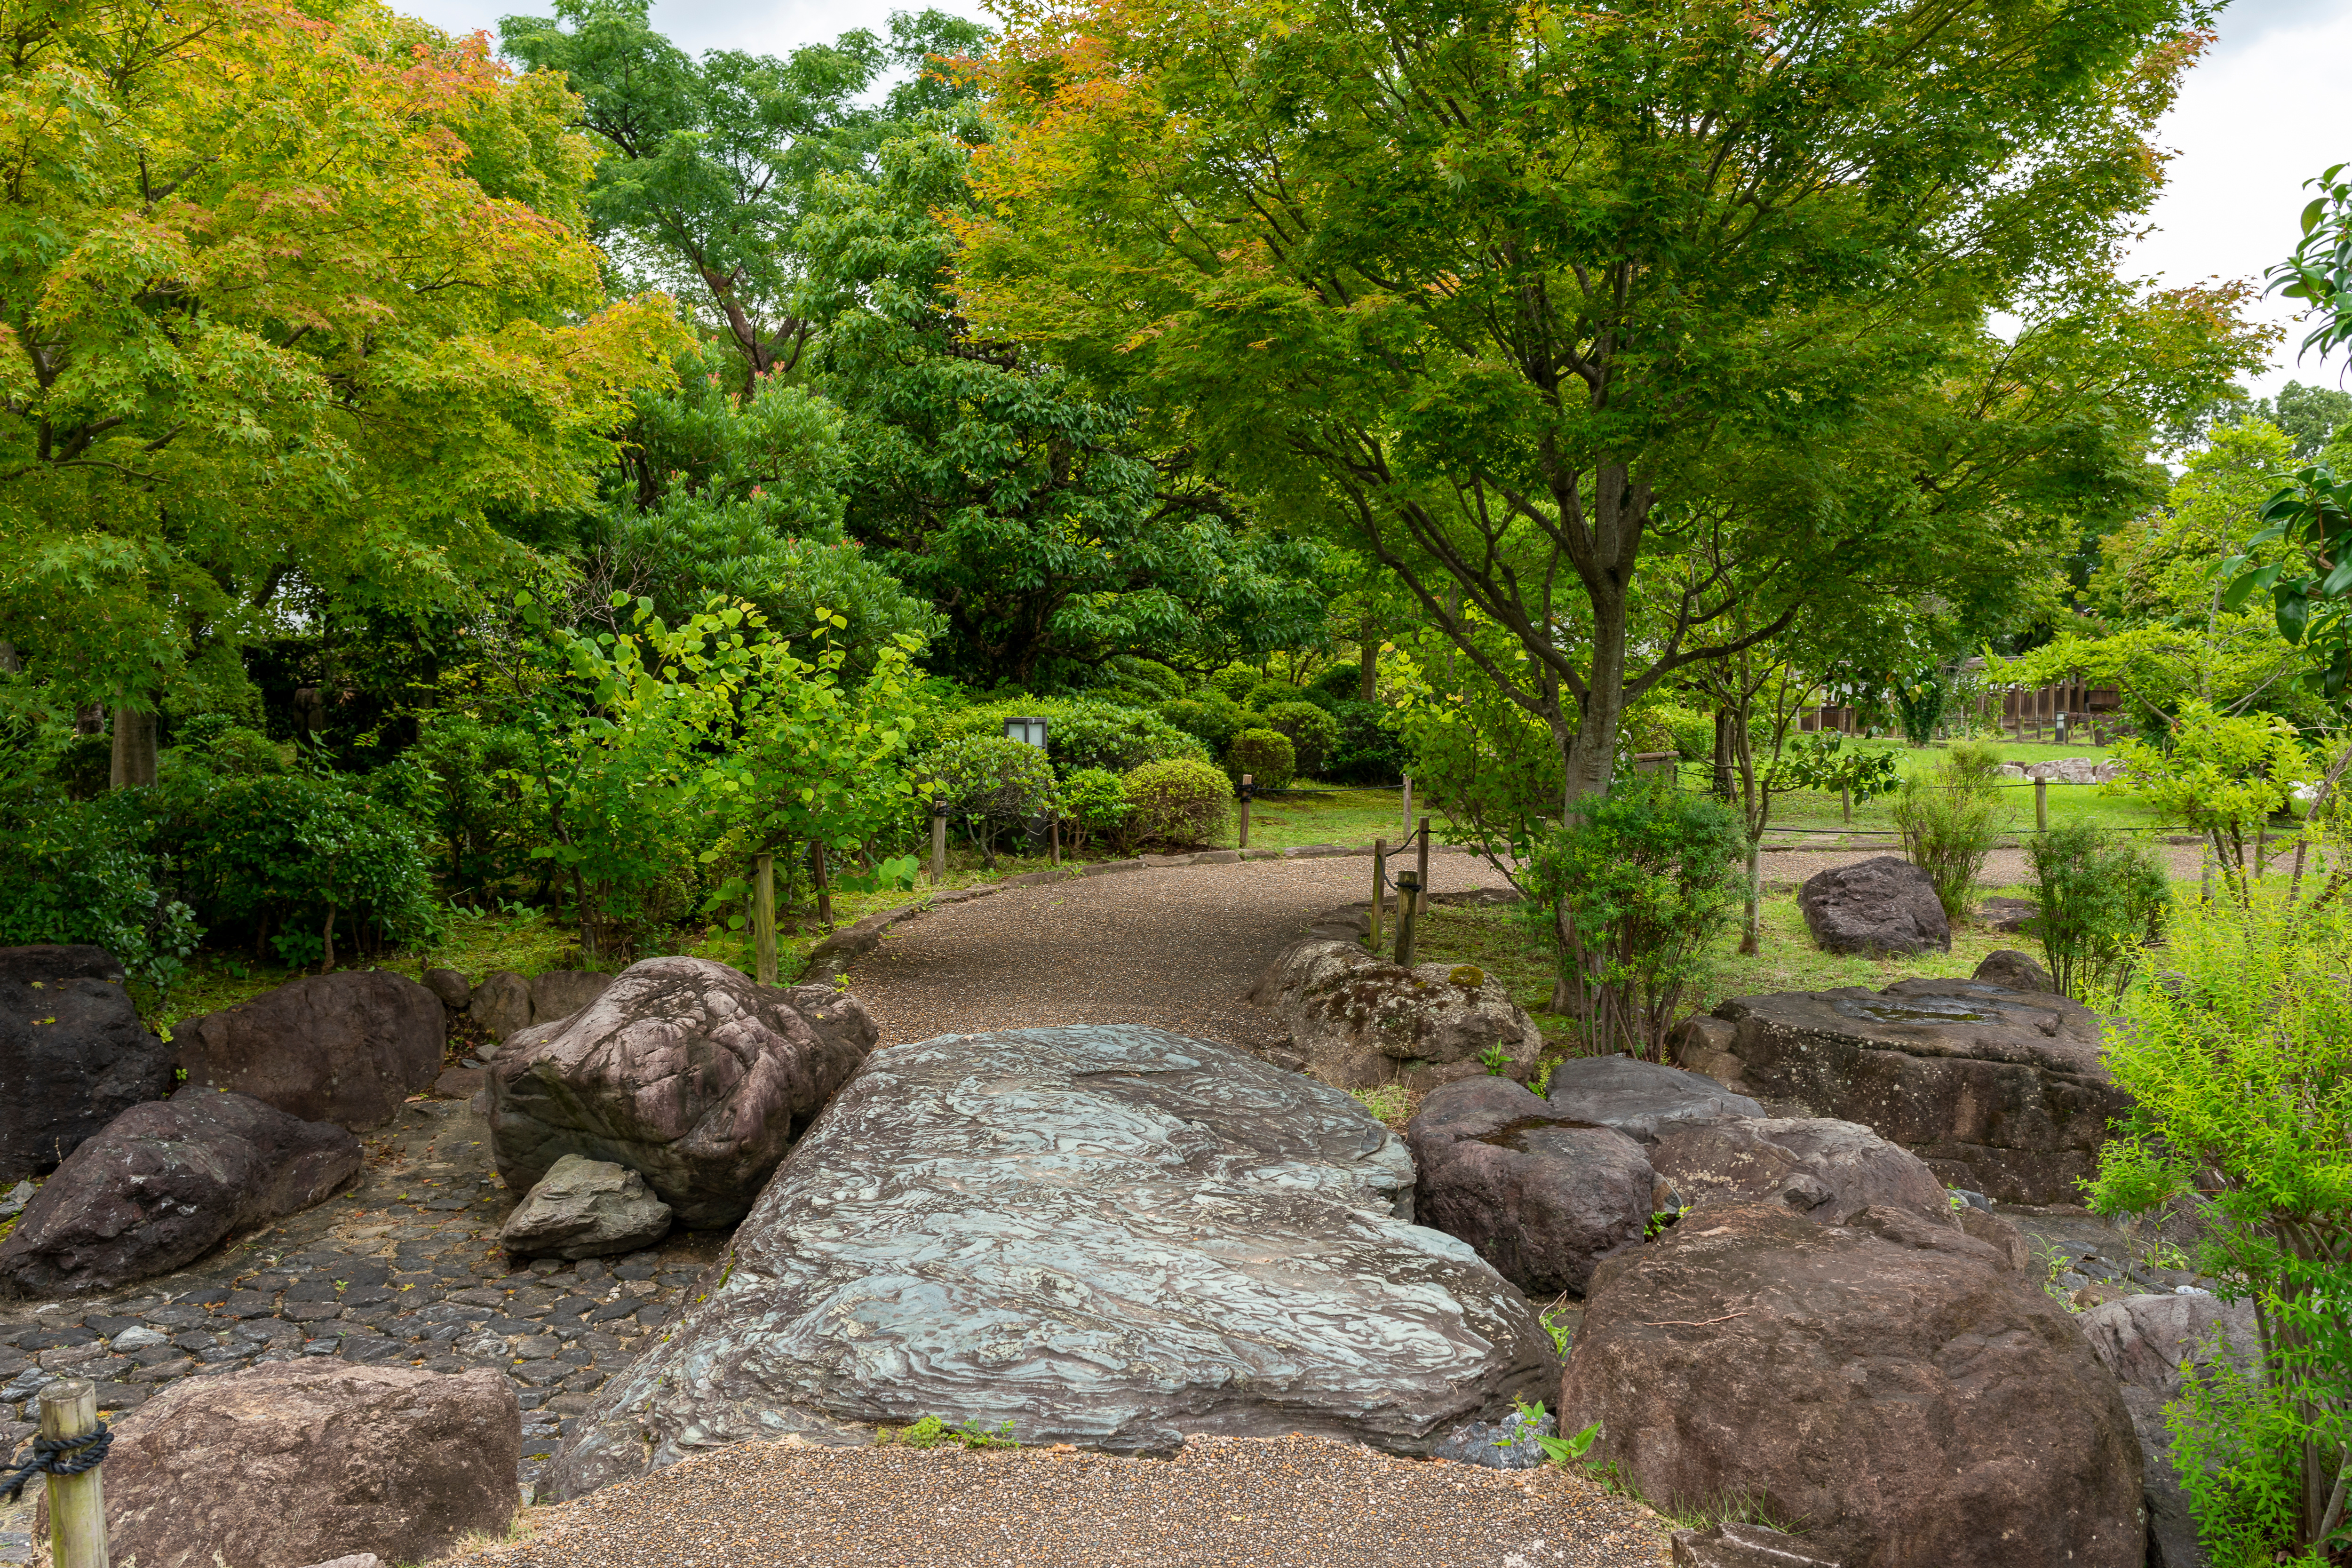 A garden path is lined with many trees and rocks